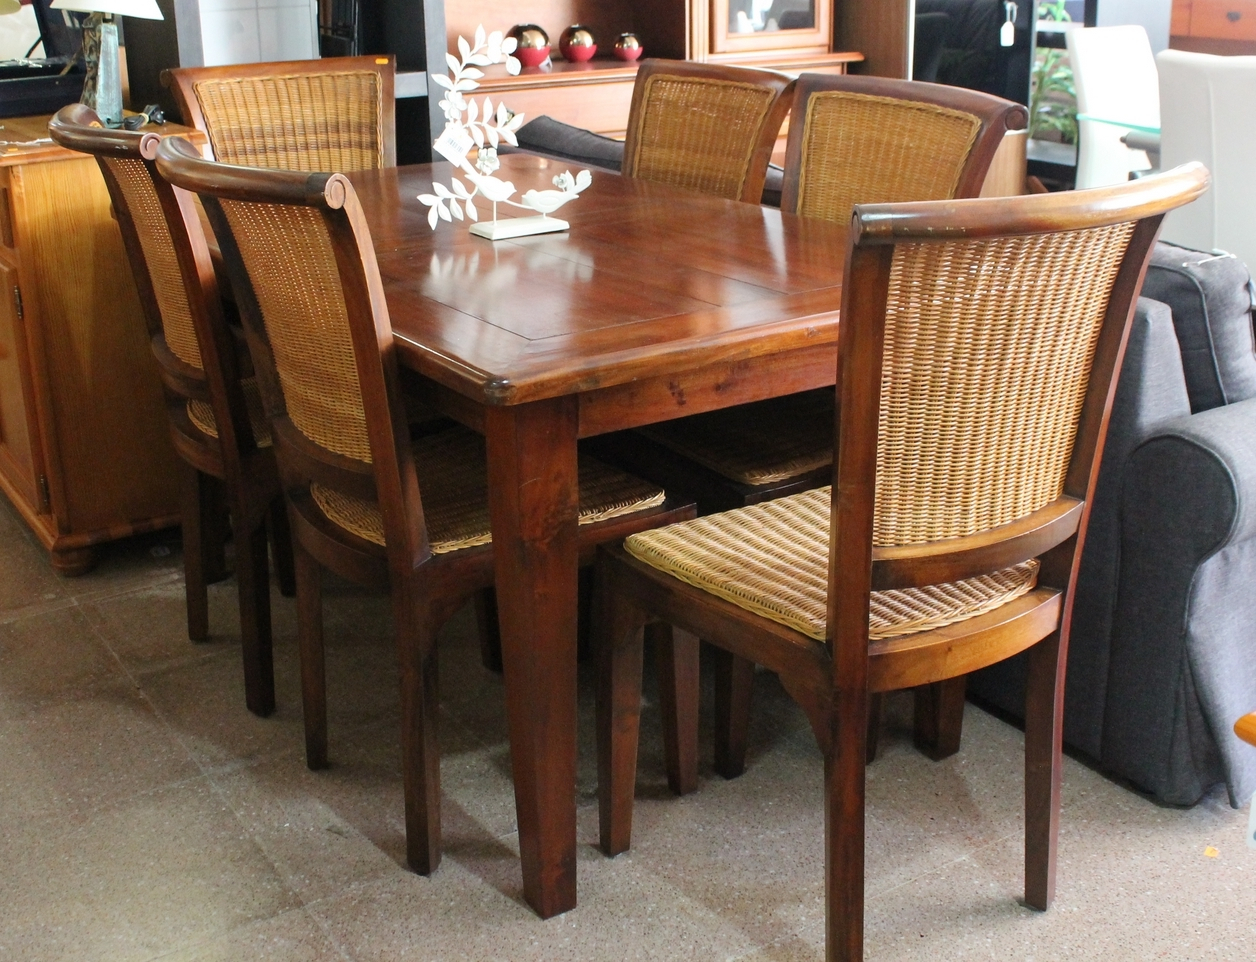 Dining Room Table And Chairs Second Hand